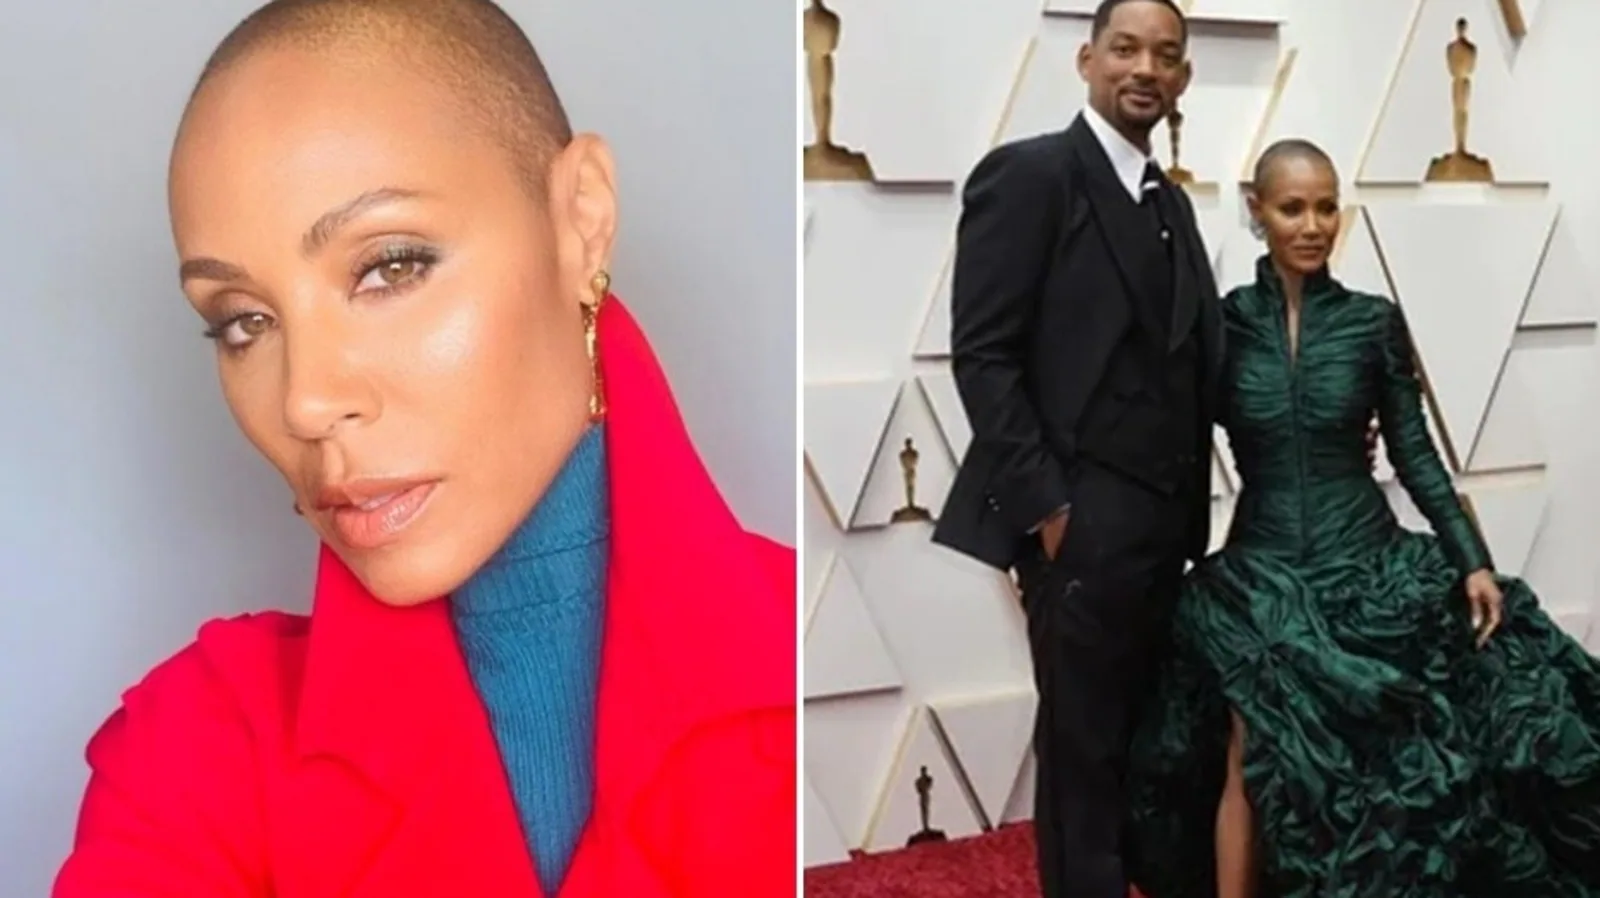 What is alopecia? All about the hair loss condition Jada Pinkett Smith suffers from